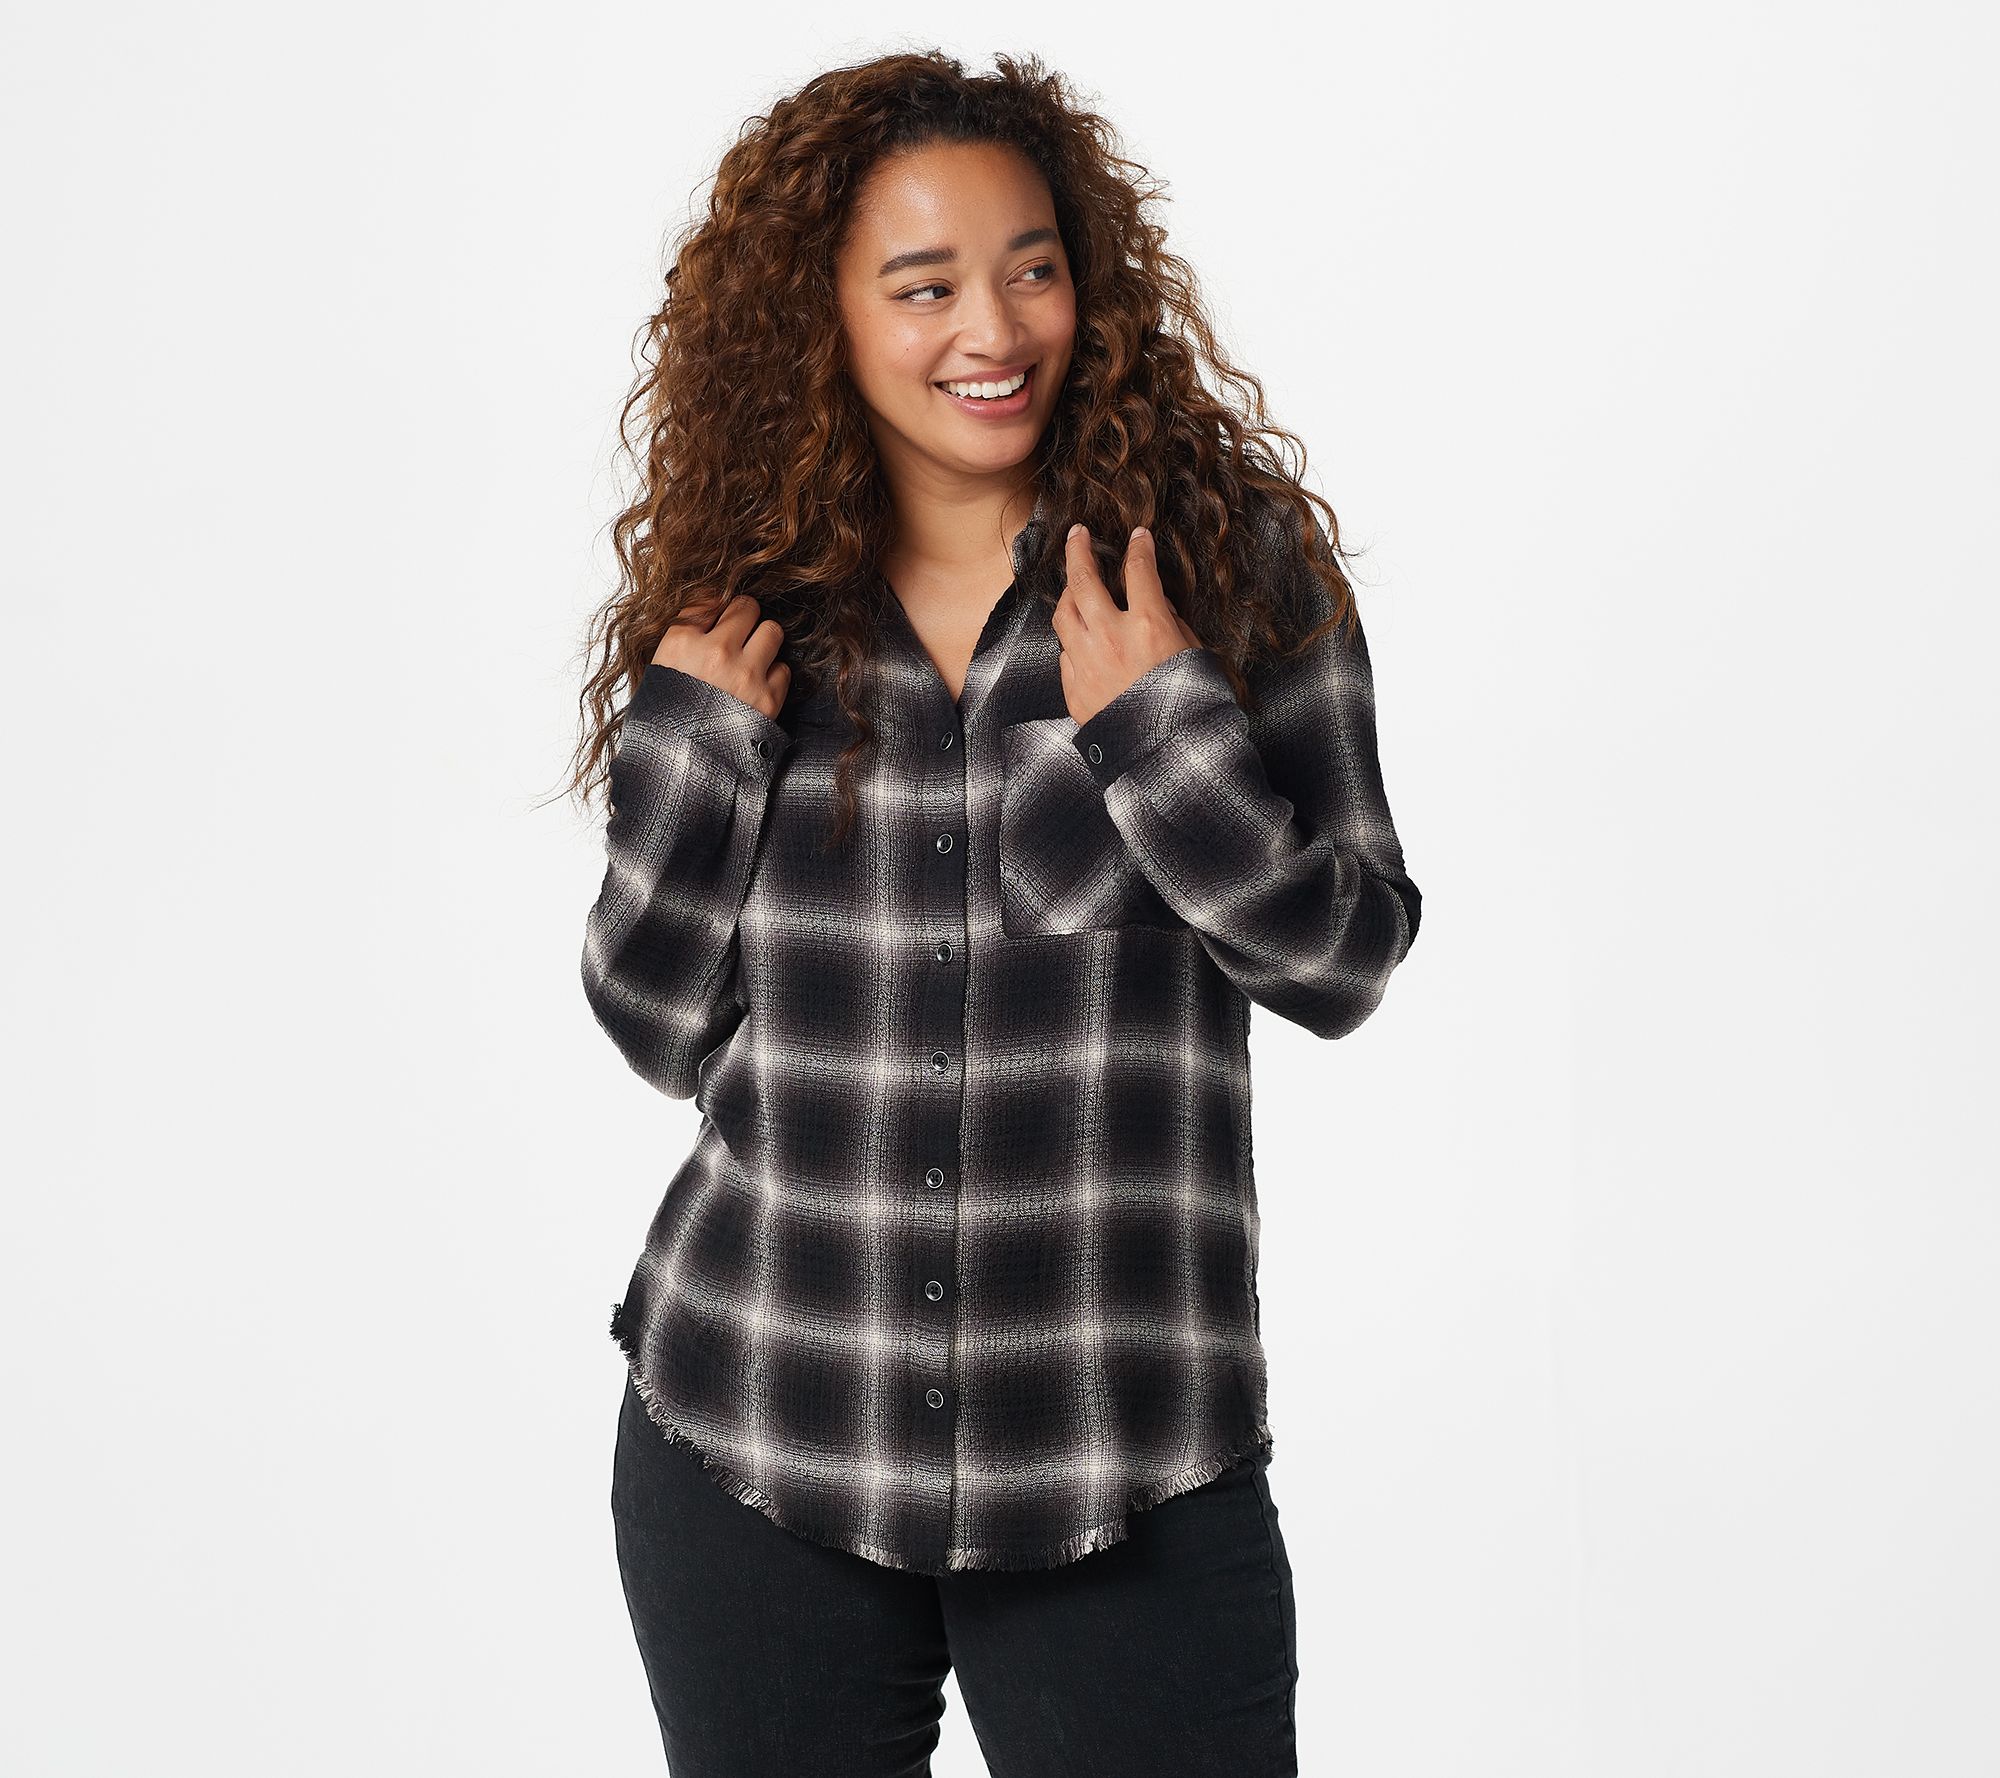 Side Stitch Rounded Yoke Plaid Button Front Top - QVC.com